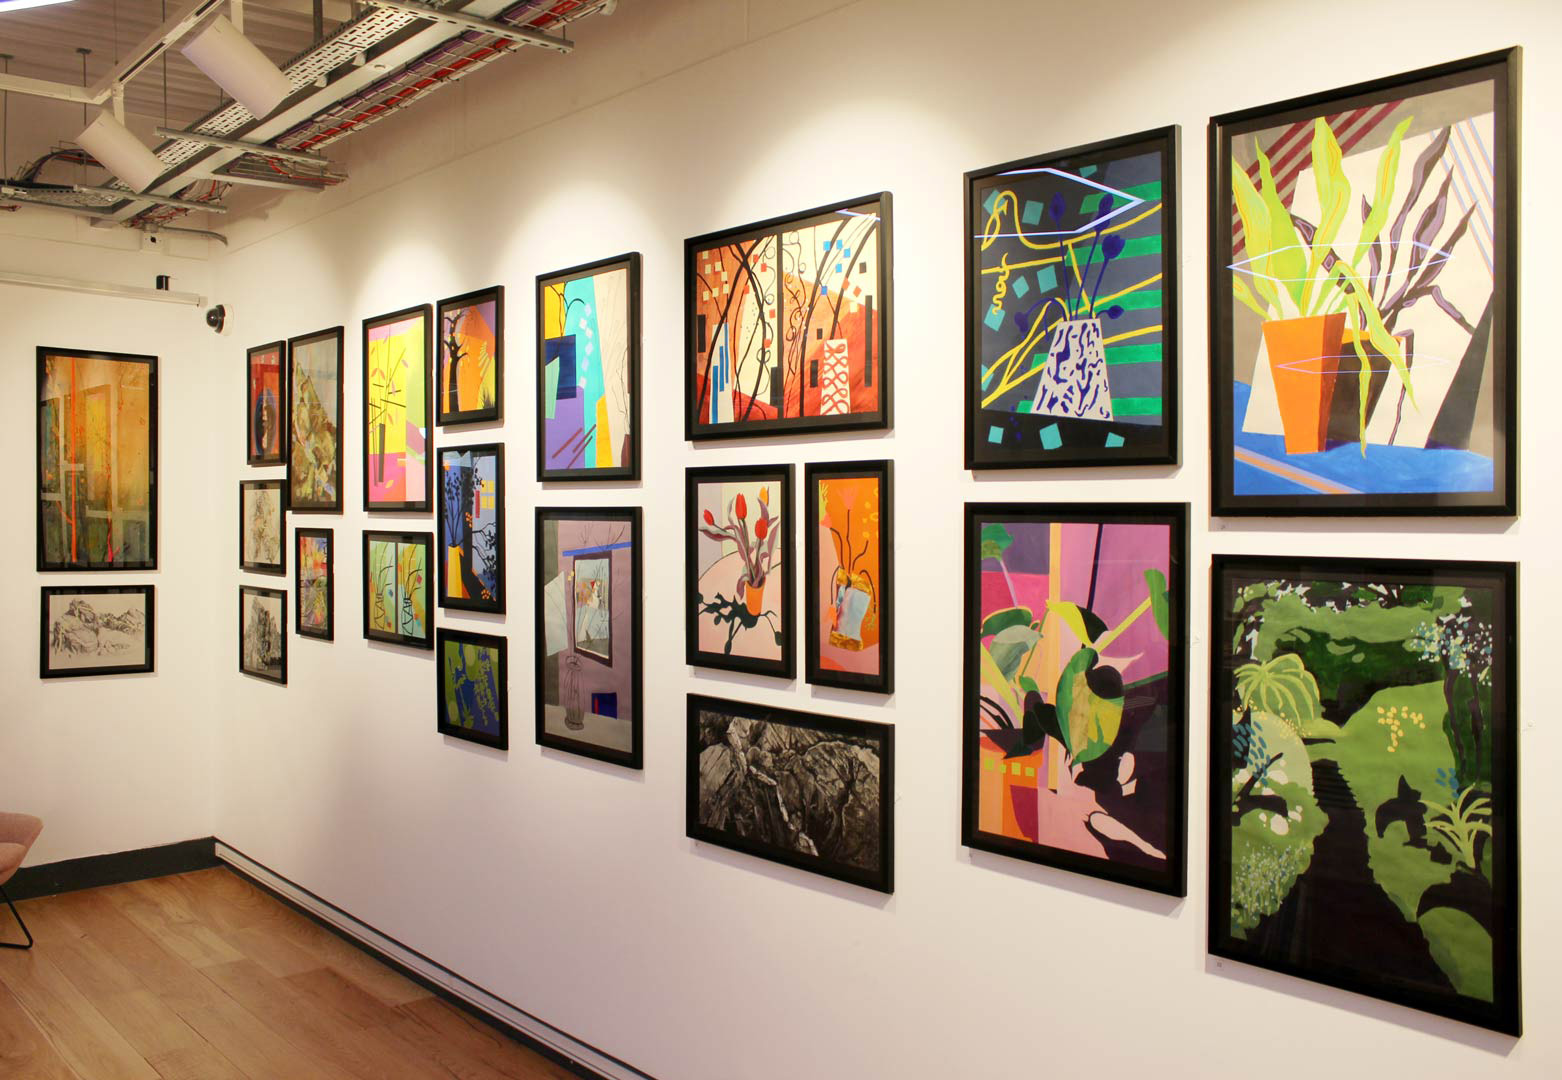 A corner of the Salmon Gallery, with the walls covered in brightly coloured framed artworks.